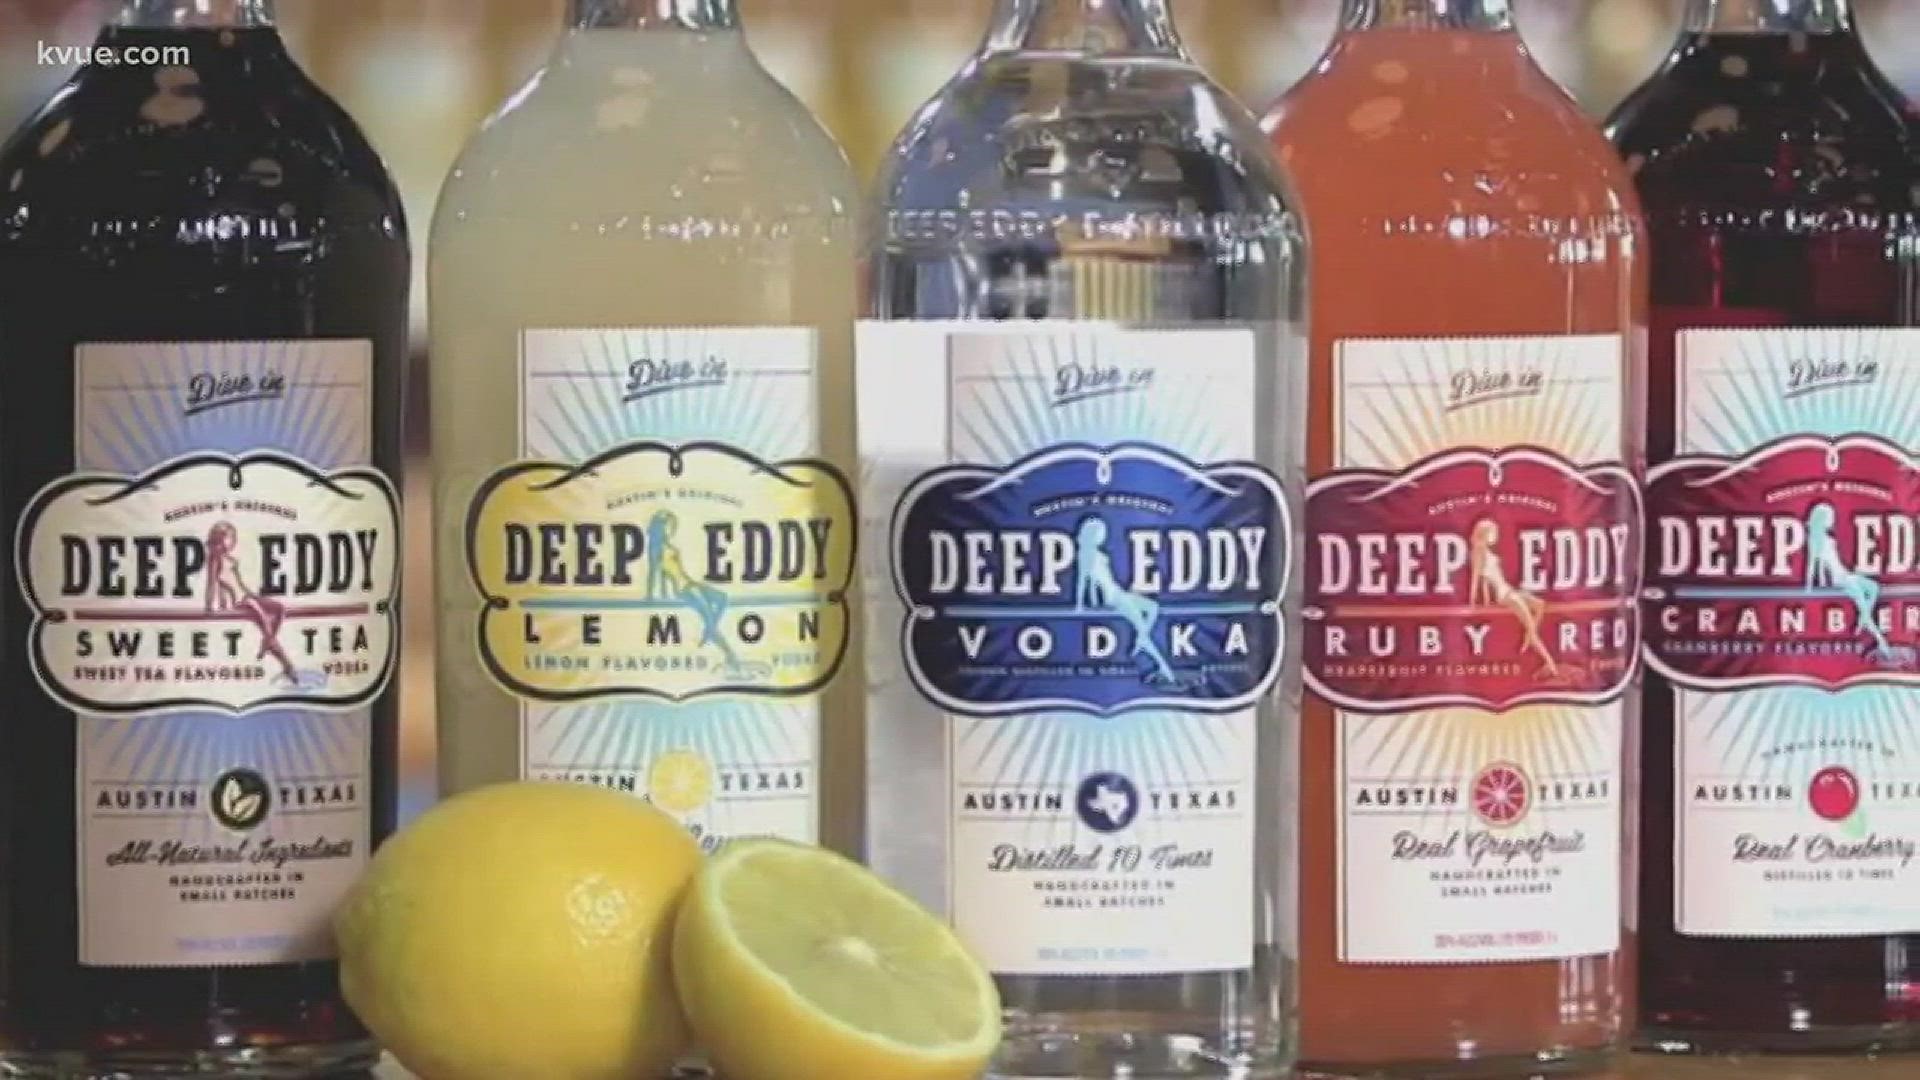 Deep Eddy has been serving up vodka to Austinites since 2010.